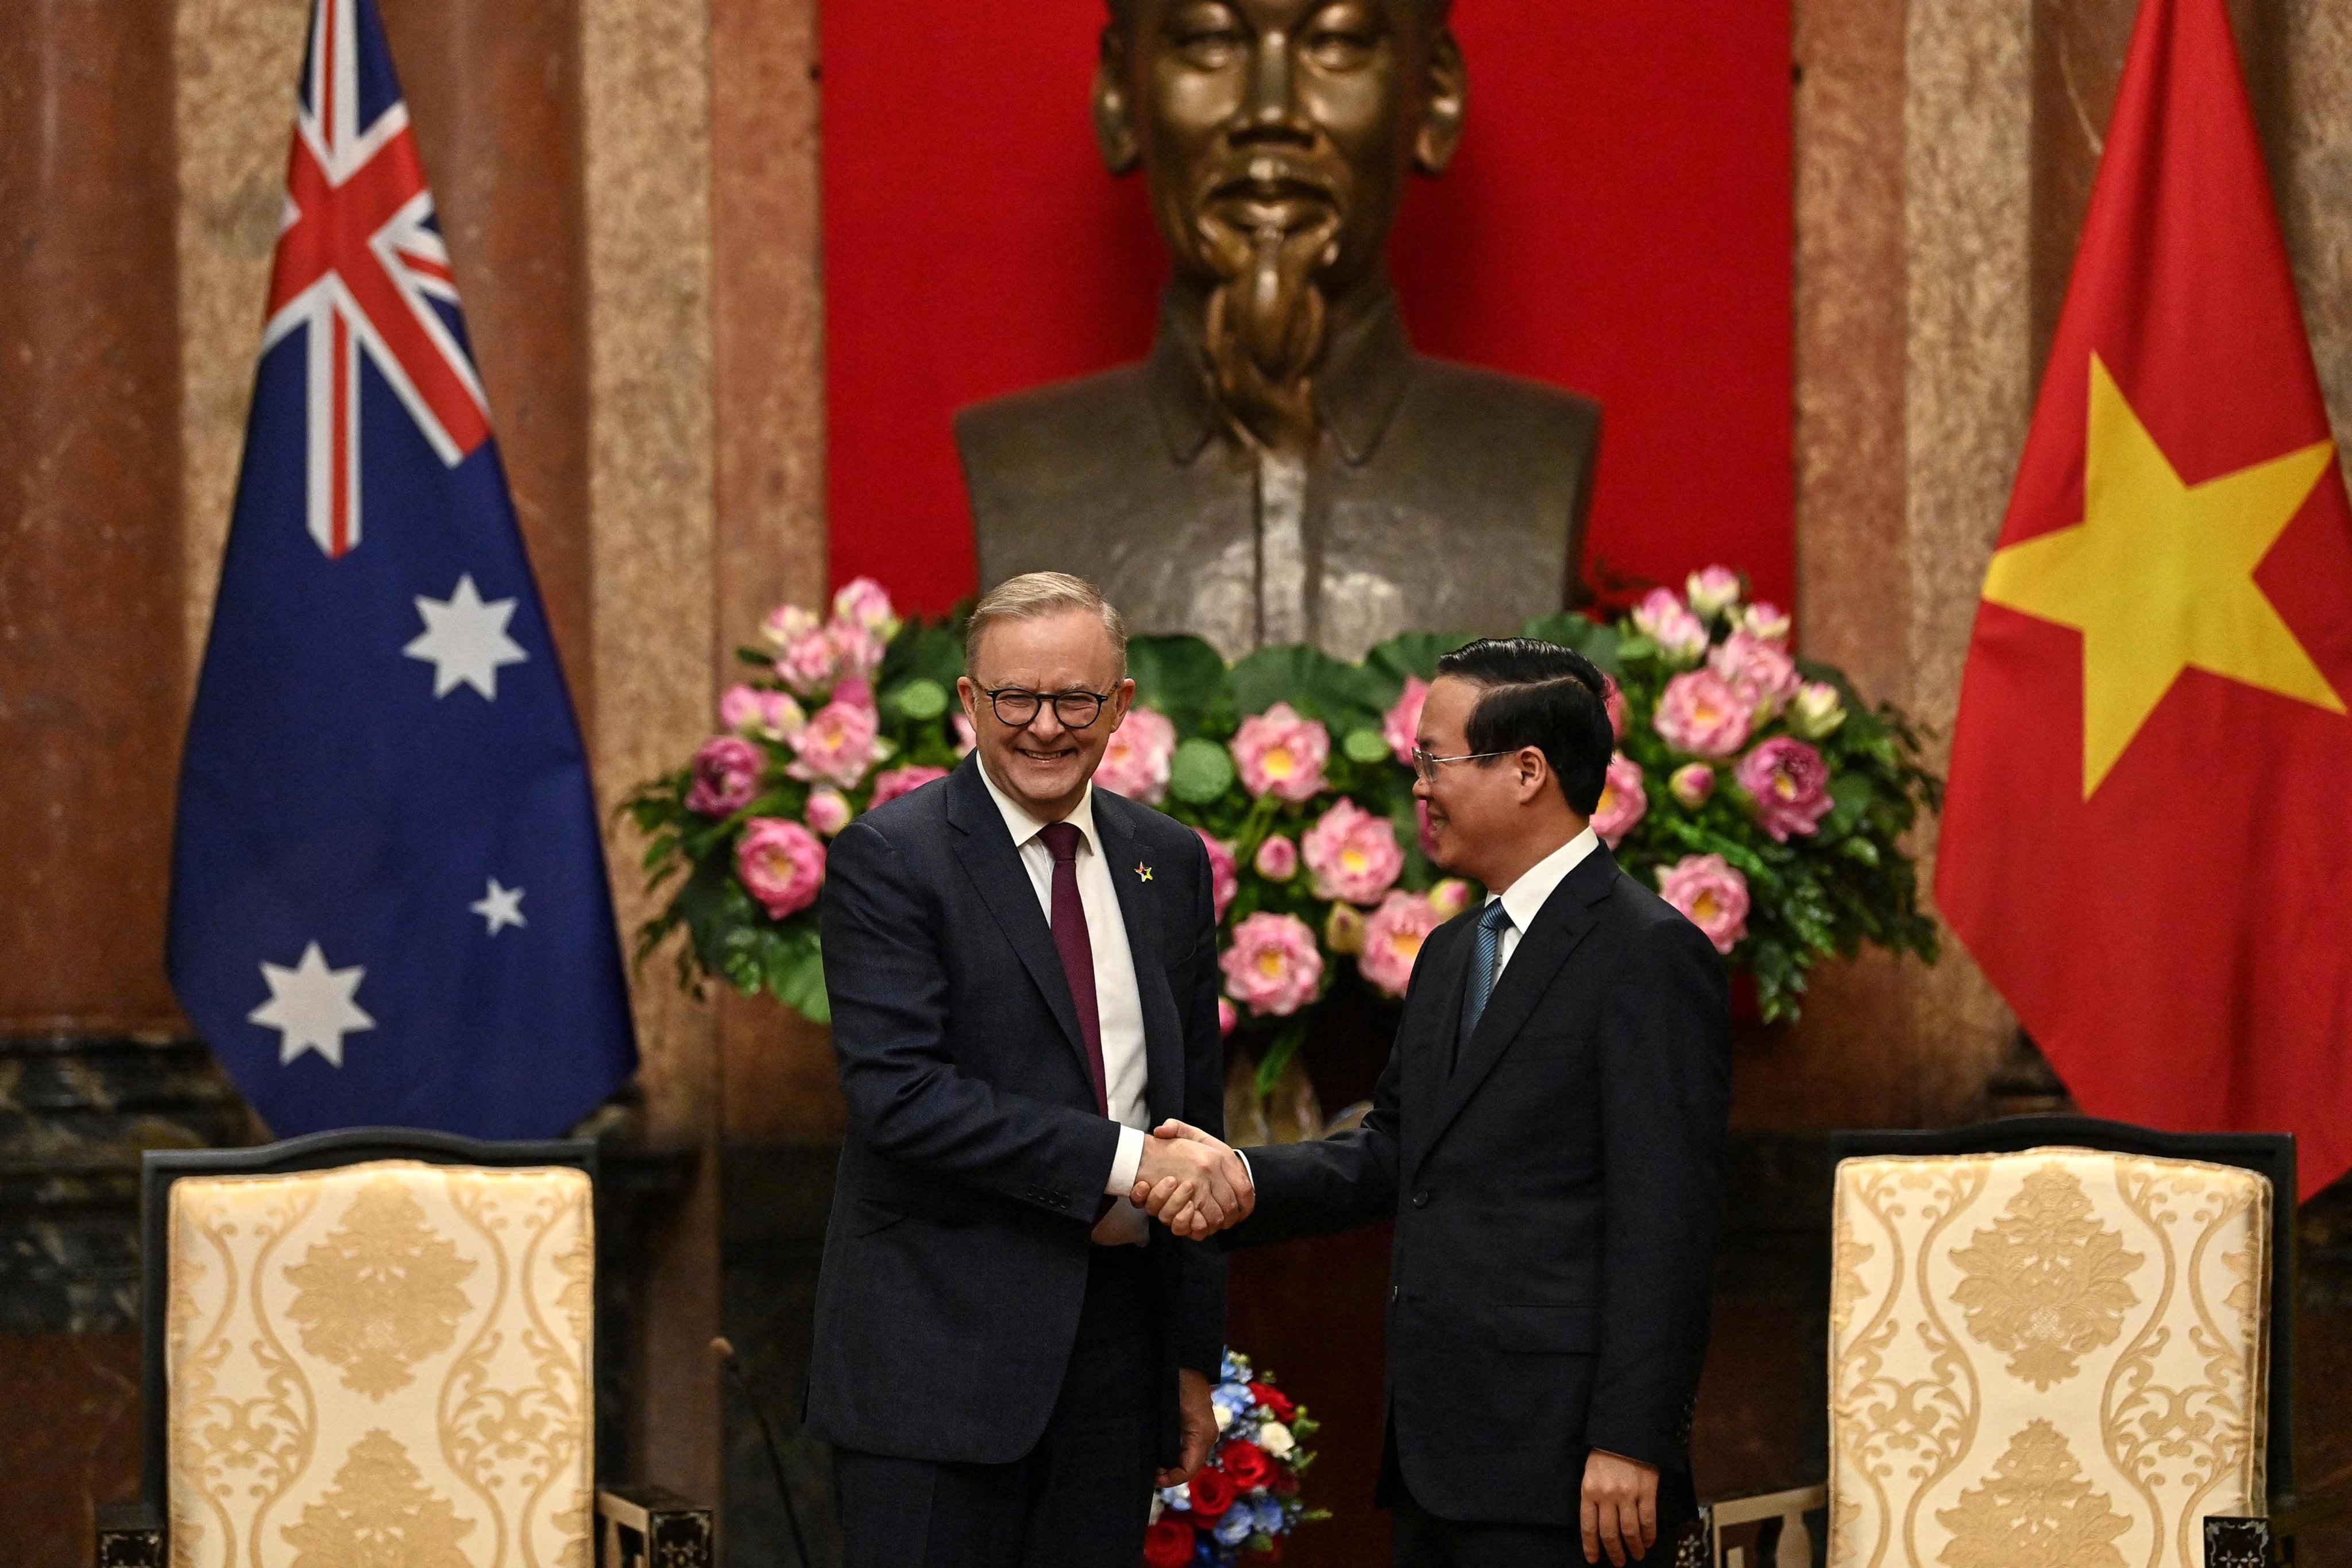 Vietnam’s President Vo Van Thuong shakes hands with Australia’s Prime Minister Anthony Albanese during a meeting at the Presidential palace in Hanoi on June 4. Photo: AFP